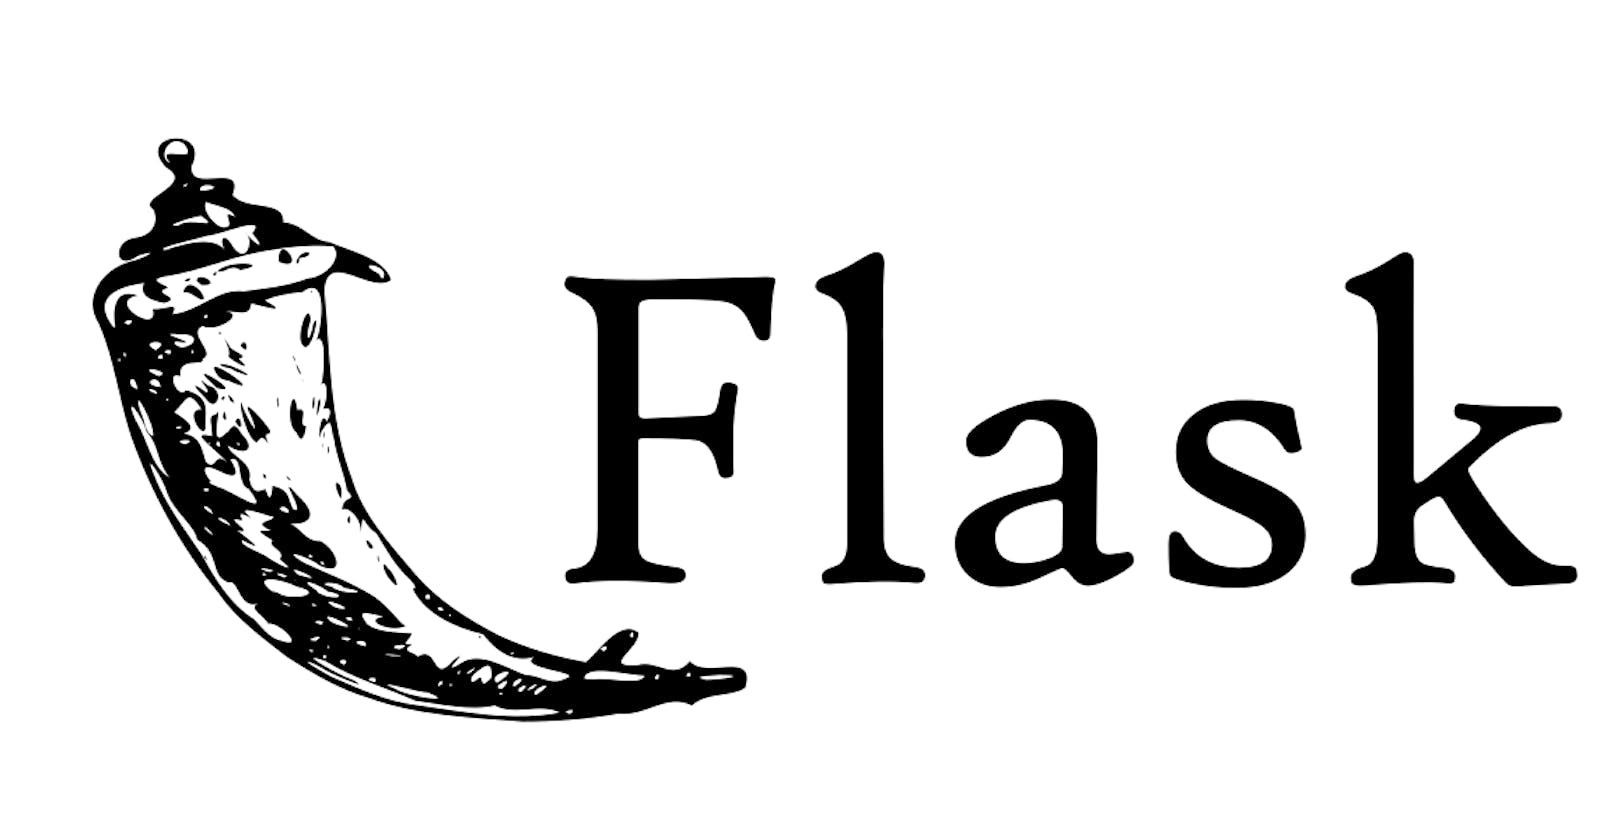 Building a simple Blog App with Flask and FlaskSQLALchemy